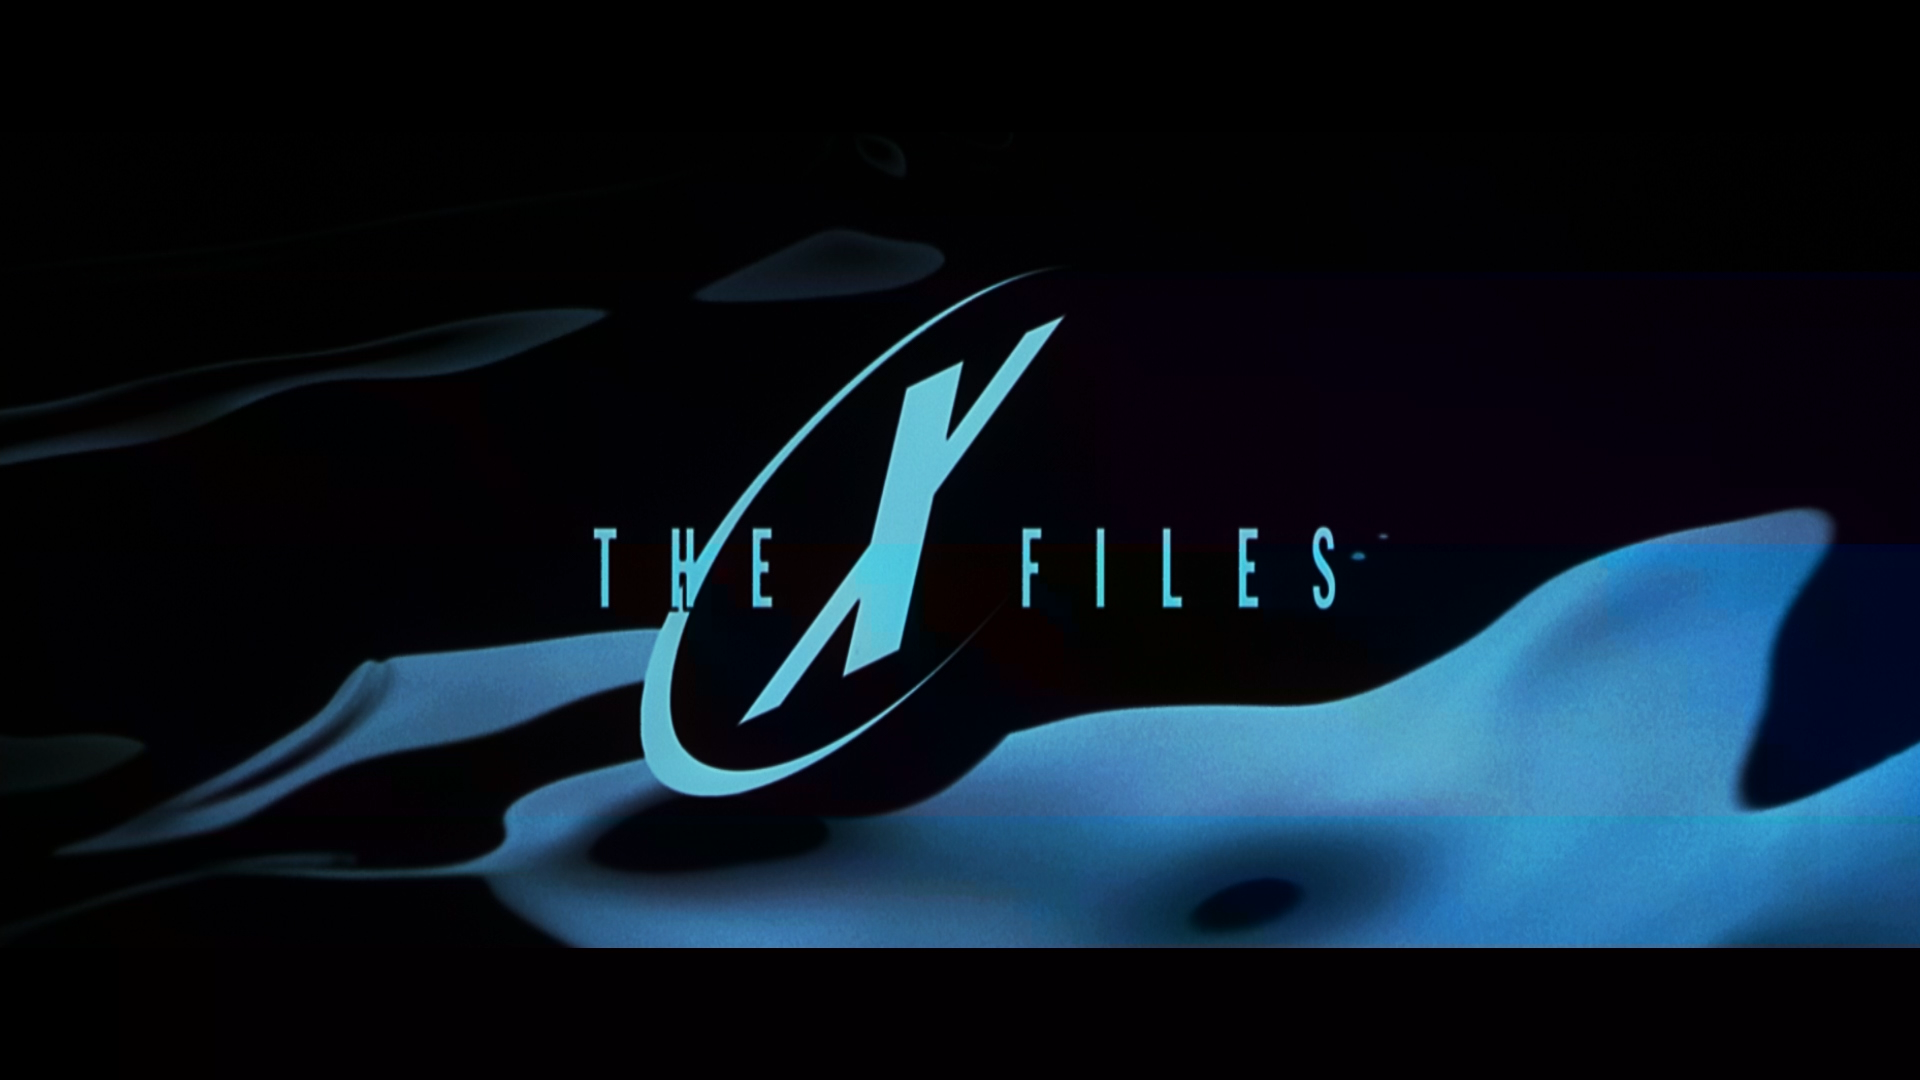 Watch The New X Files HD Wallpaper And Pictures Photos At